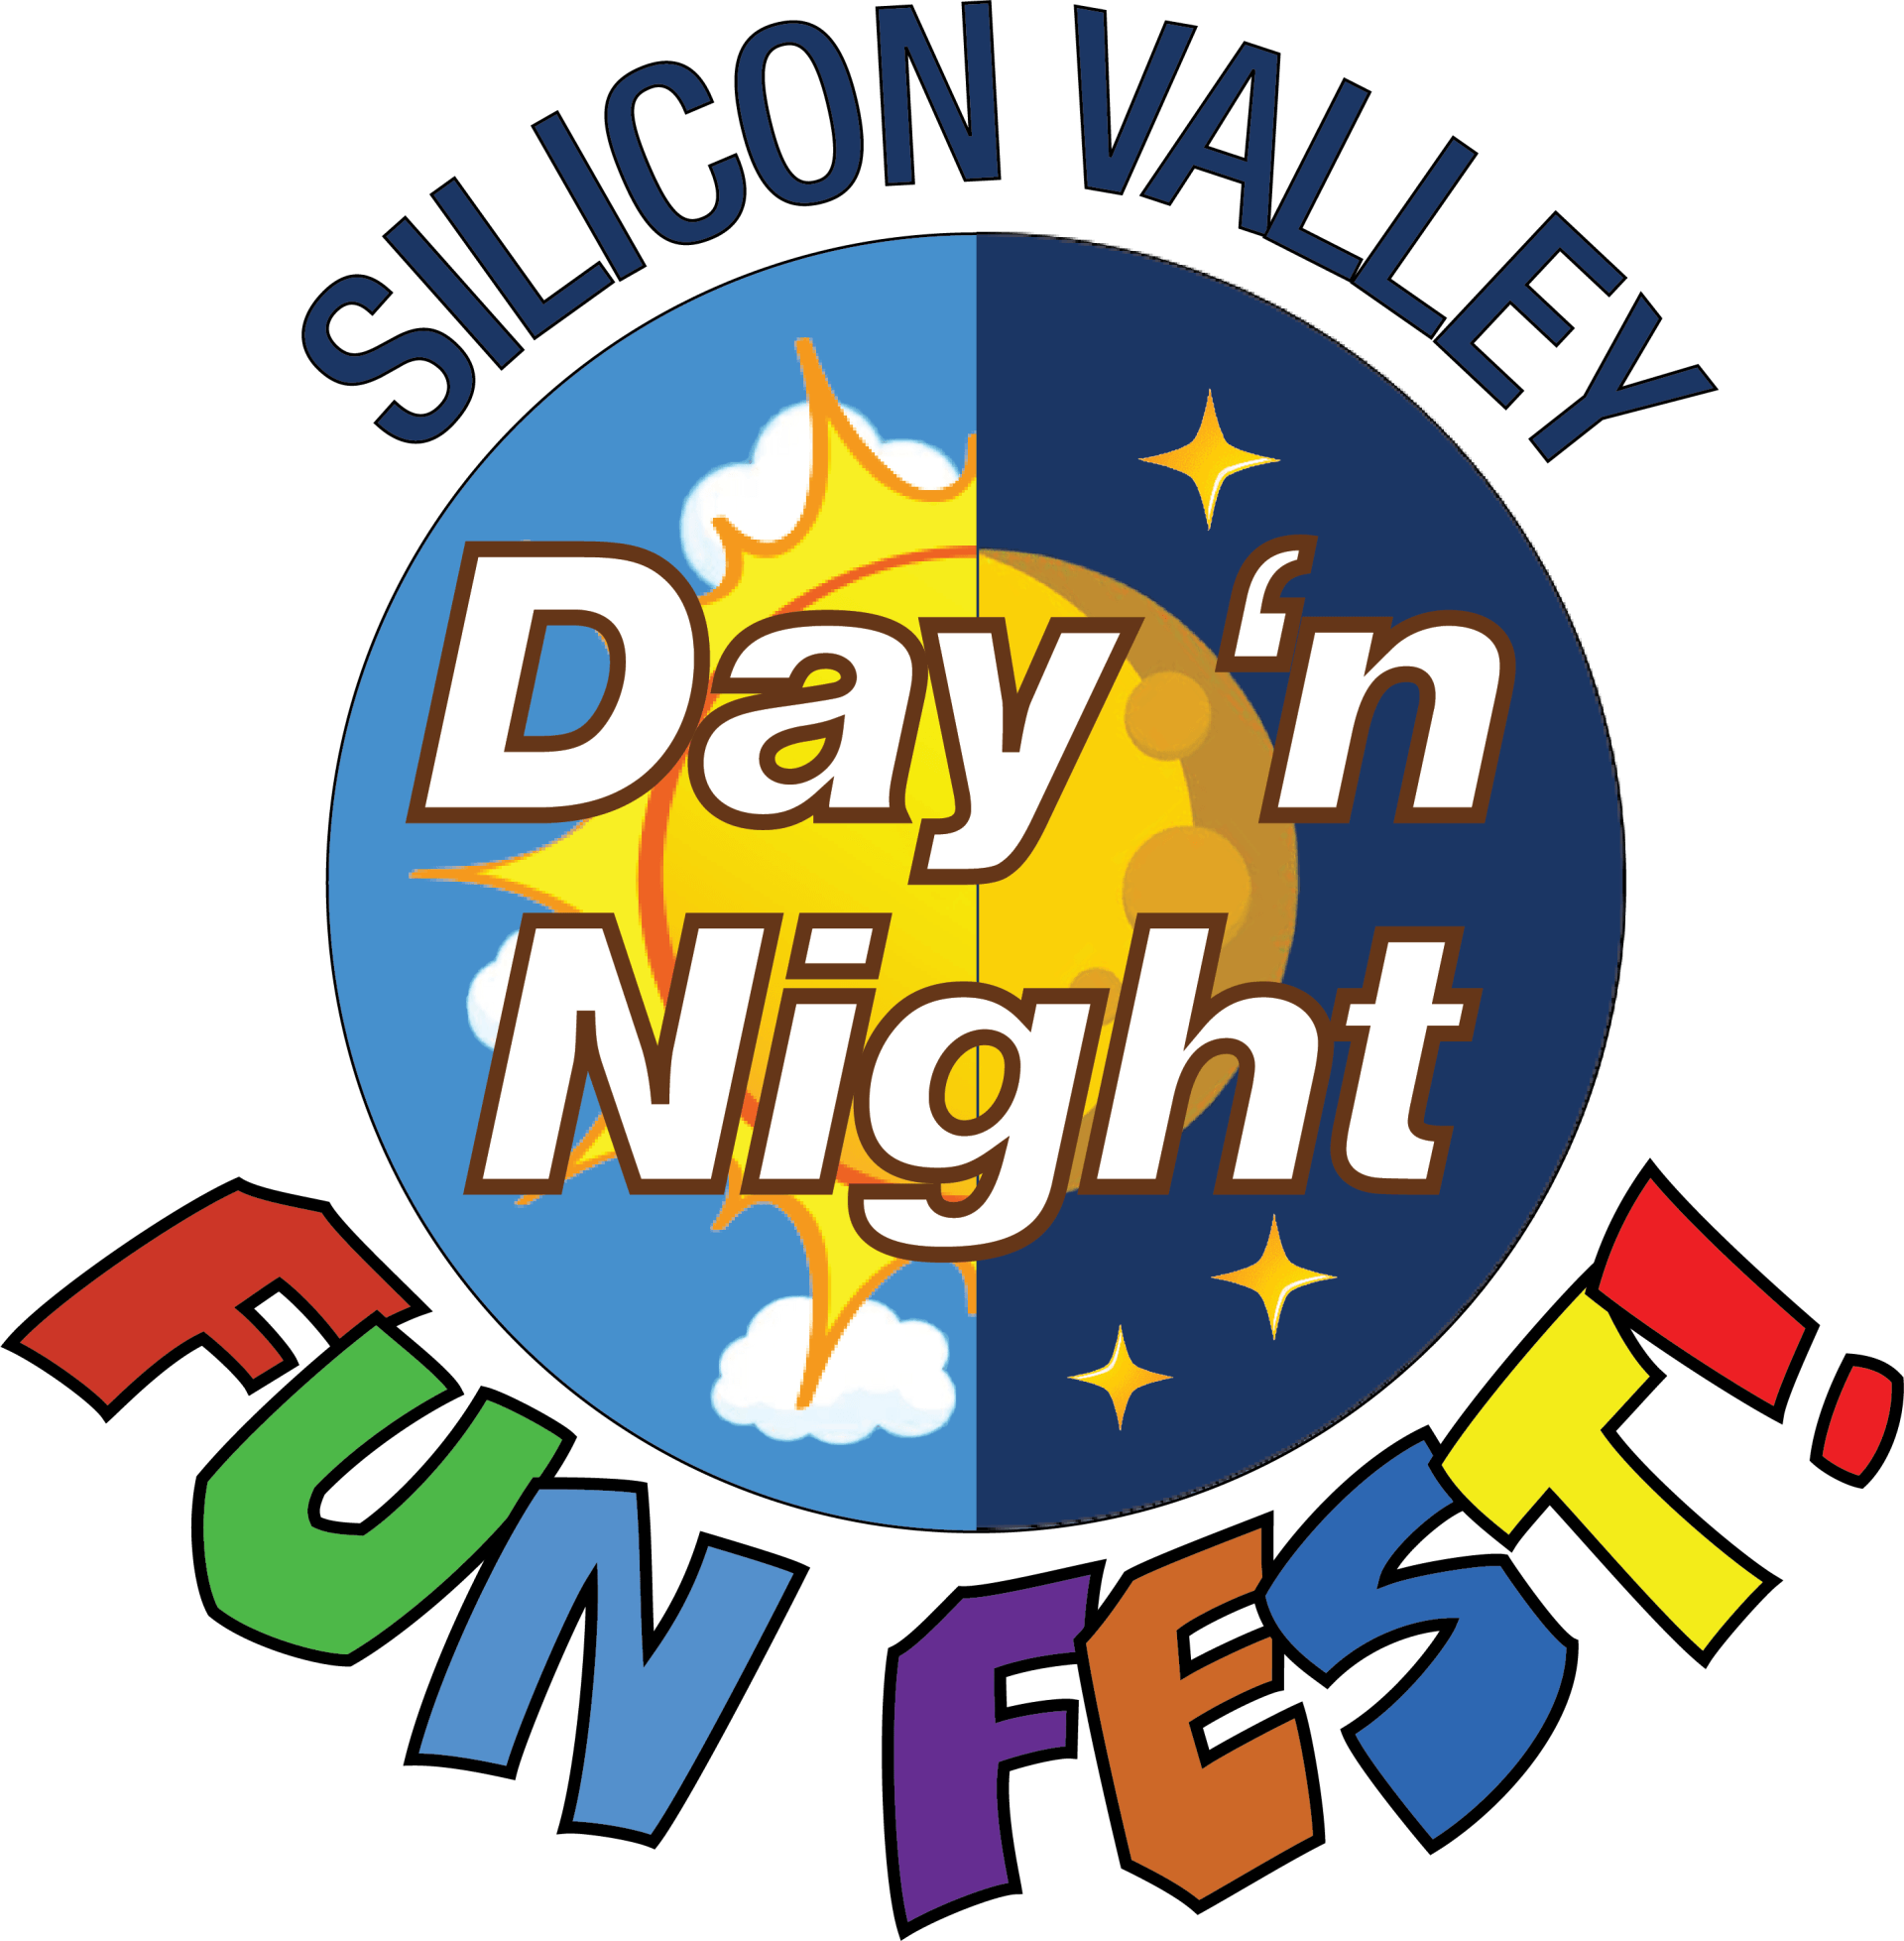 Silicon Valley Fun Fest About Event